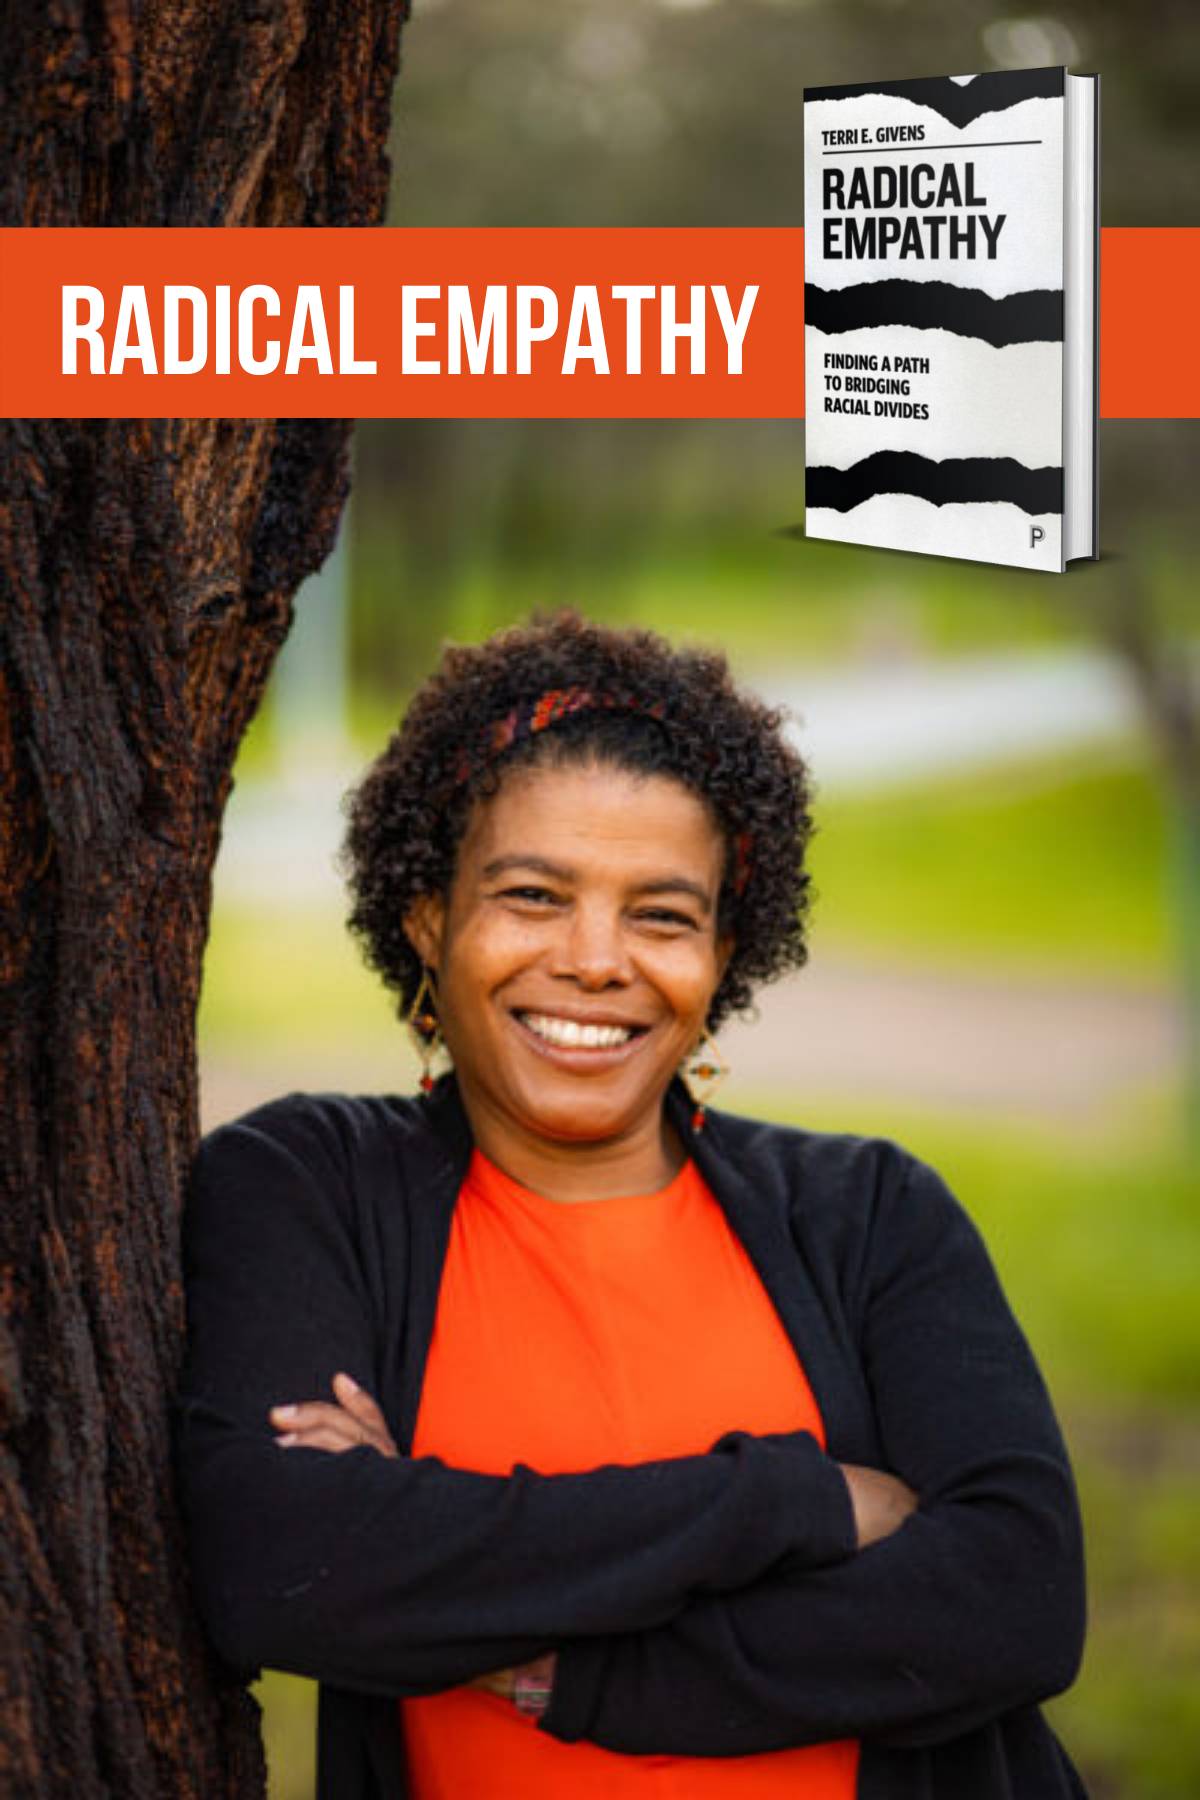 Dr. Terri Givens with her book, Radical Empathy.